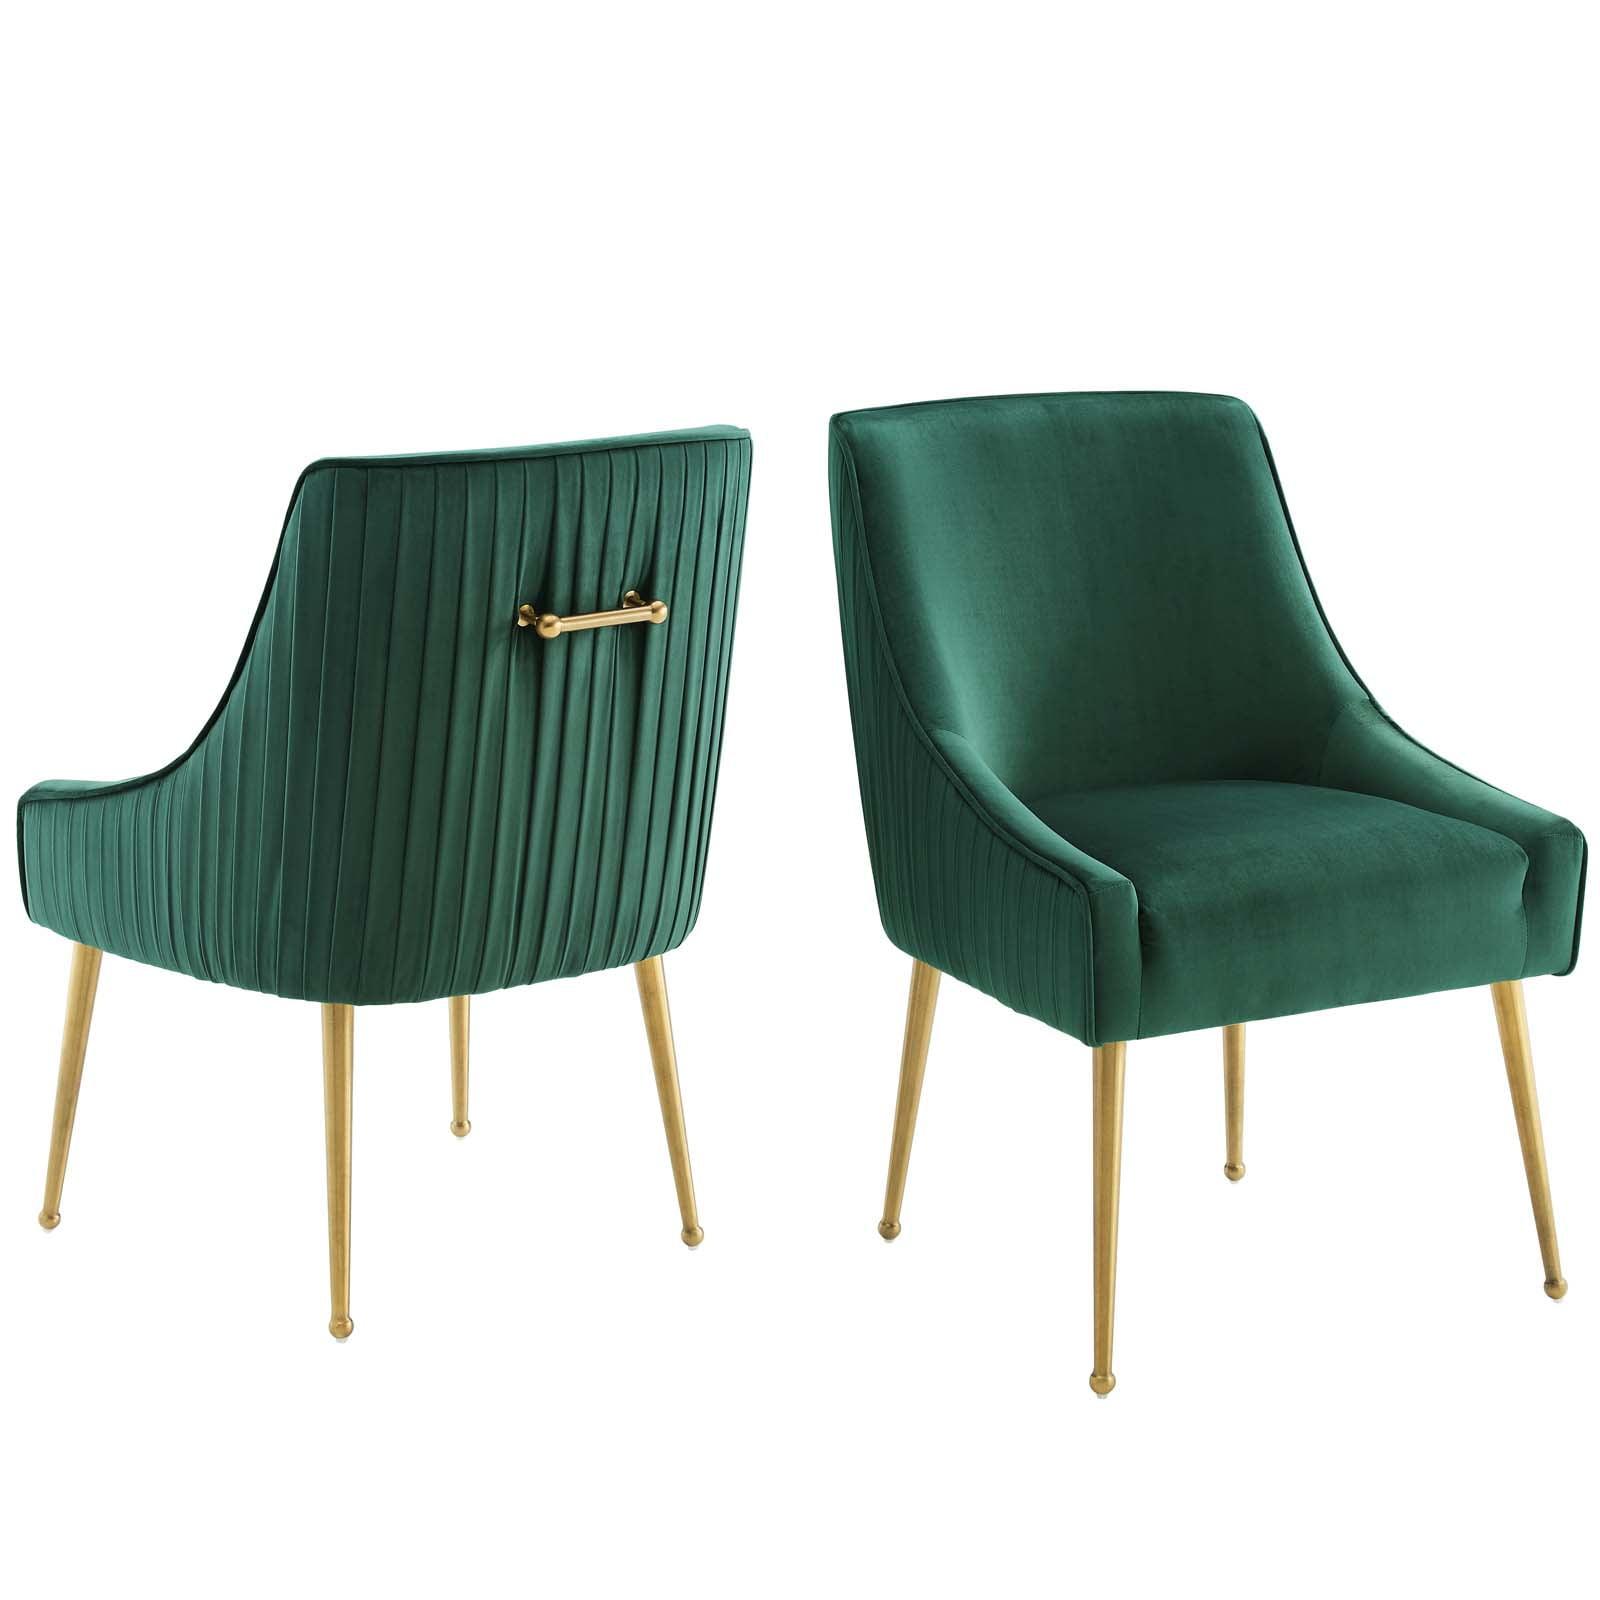 Elegance Green Velvet Upholstered Dining Chair Set with Metal Accents